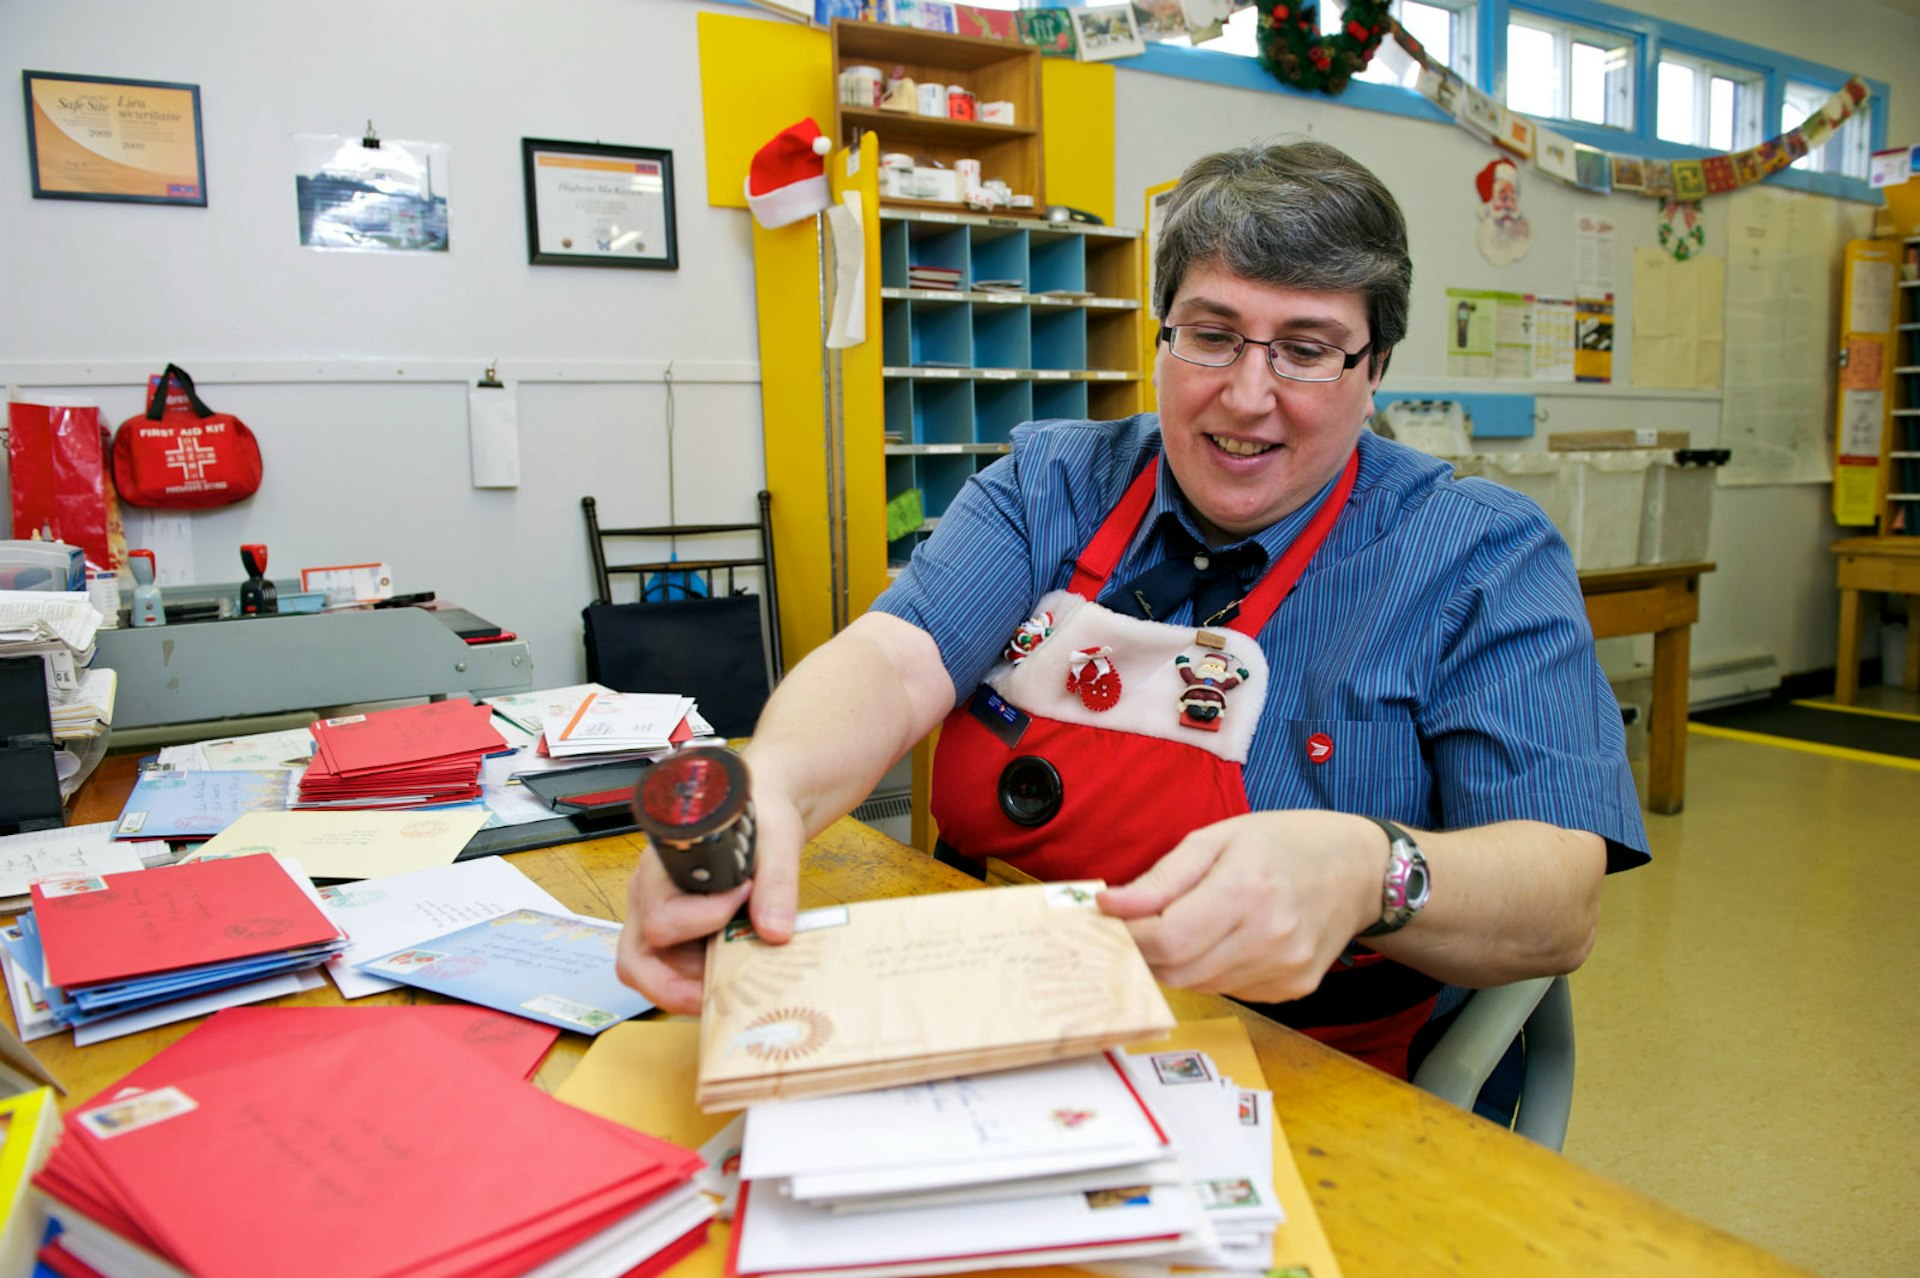 A postal worker on Christmas Island prepares to stamp the year's season's greetings © The Washington Post / Getty Images